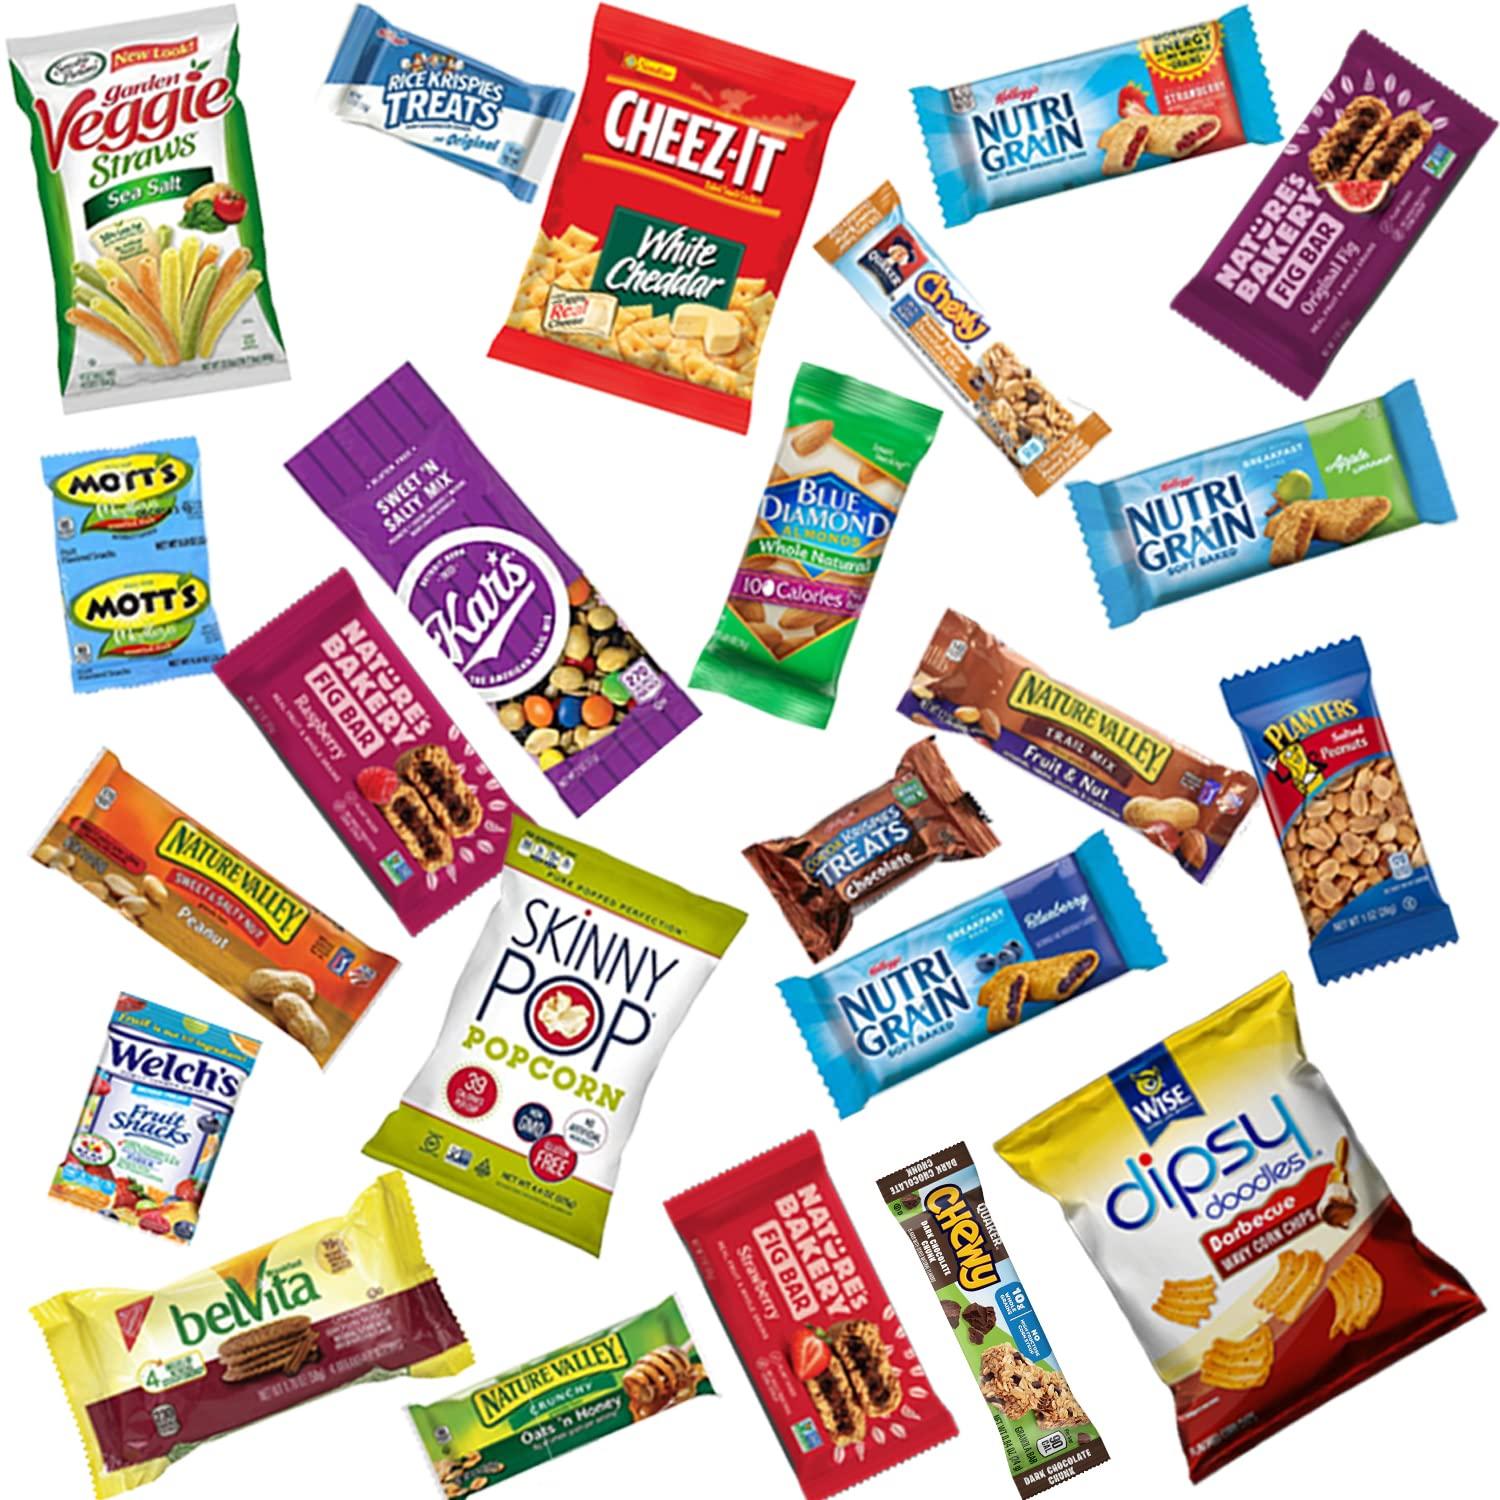 Healthy Snacks Care Package (Count 30) - Discover a whole new